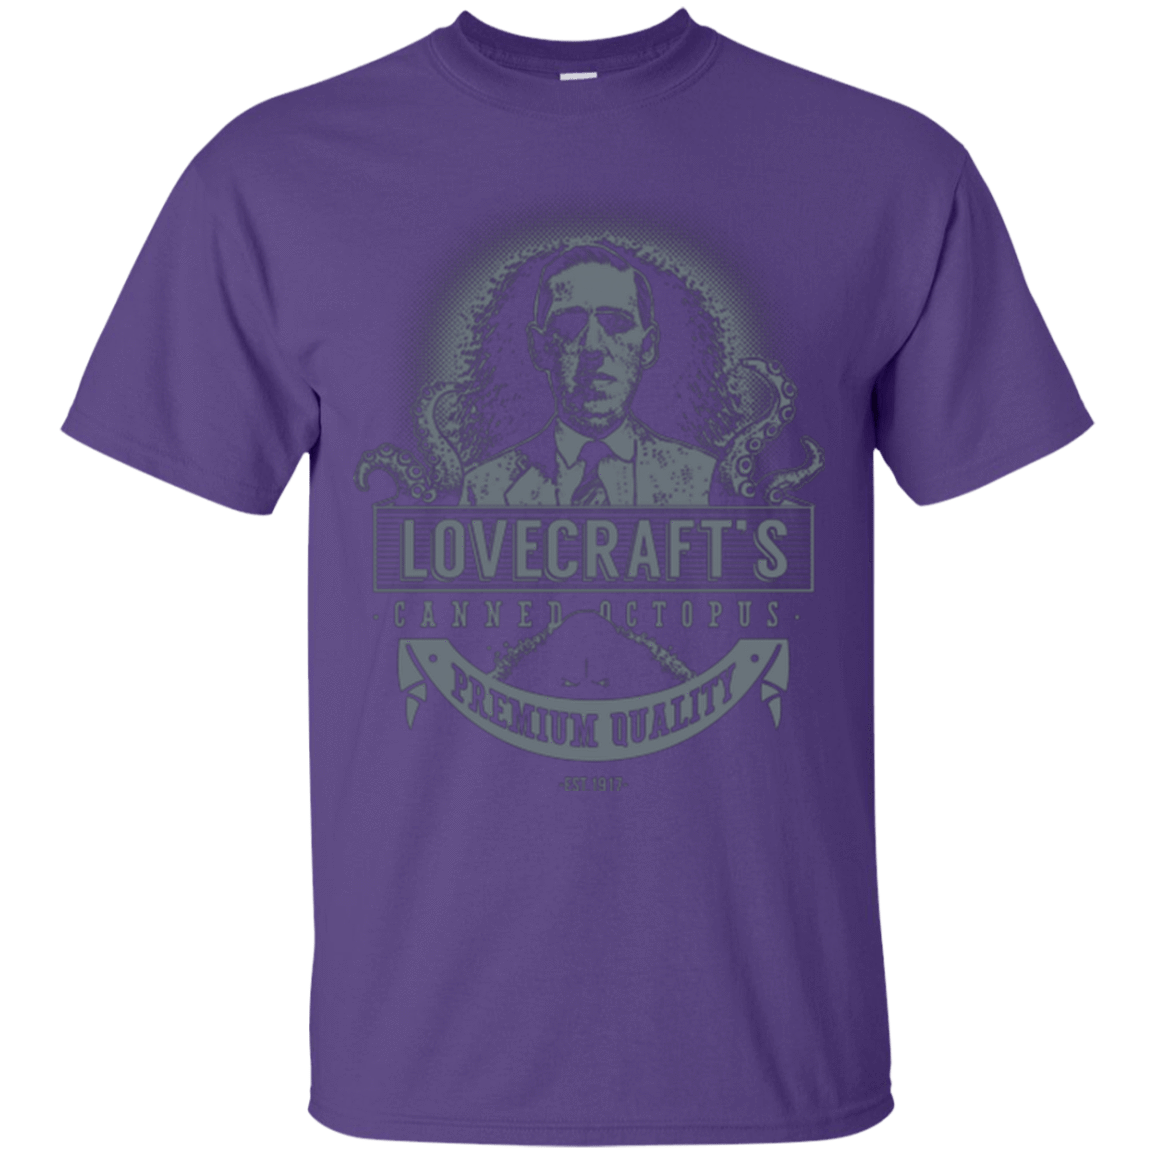 T-Shirts Purple / Small Lovecraft Canned Octopus T-Shirt